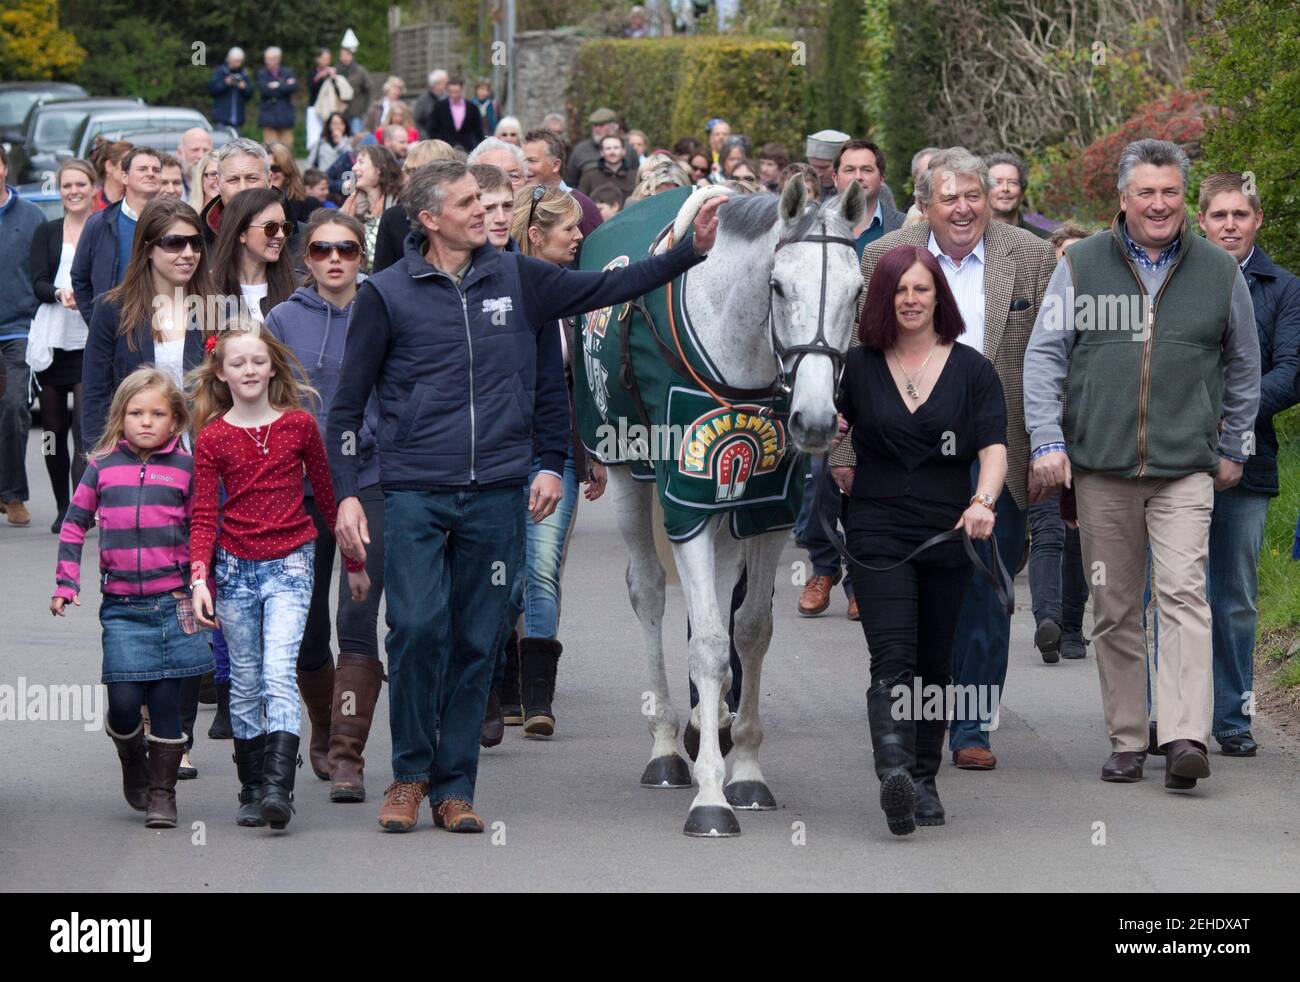 Horse Racing - Grand National Winner Neptune Collonges Returns to Paul Nicholls Stables - Ditcheat, Somerset - 15/4/12  Trained by Paul Nicholls, the 2012 Grand National Winner Neptune Collonges is paraded down the village High Street near his stables  Mandatory Credit: Action Images / Julian Herbert  Livepic Stock Photo